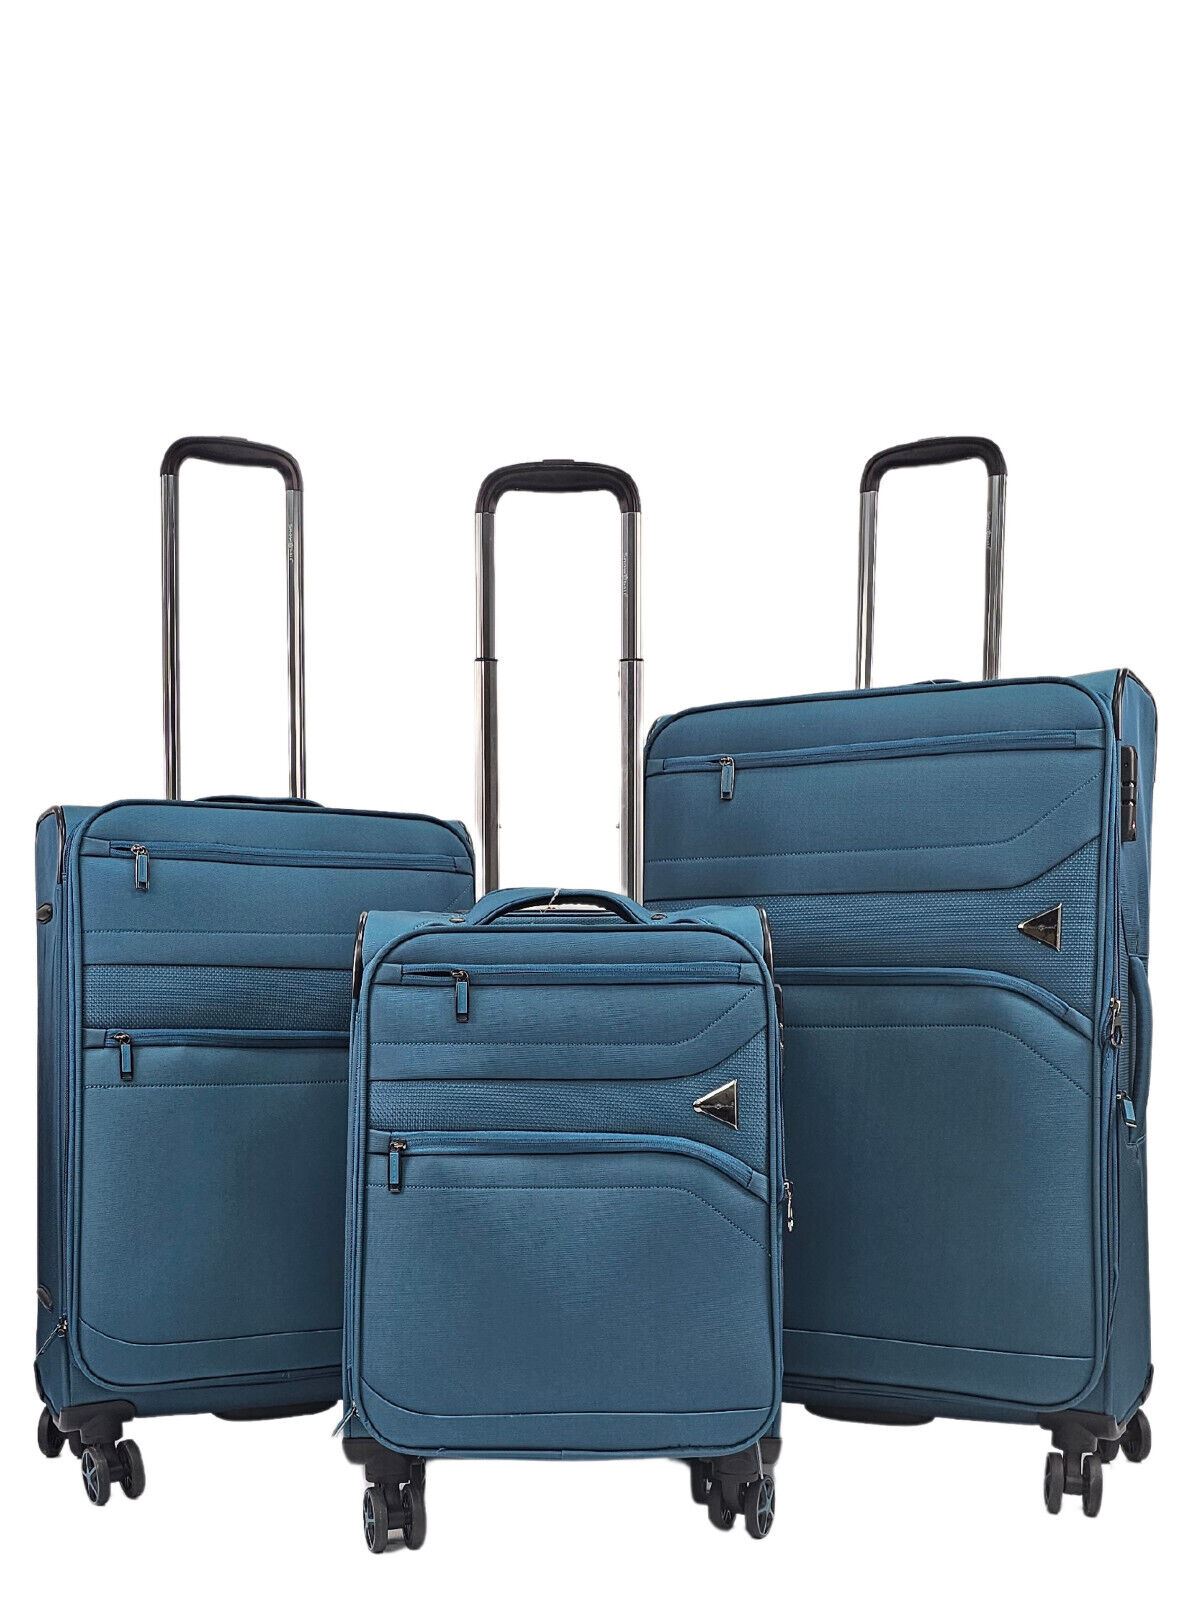 Clayton Set of 3 Soft Shell Suitcase in Teal